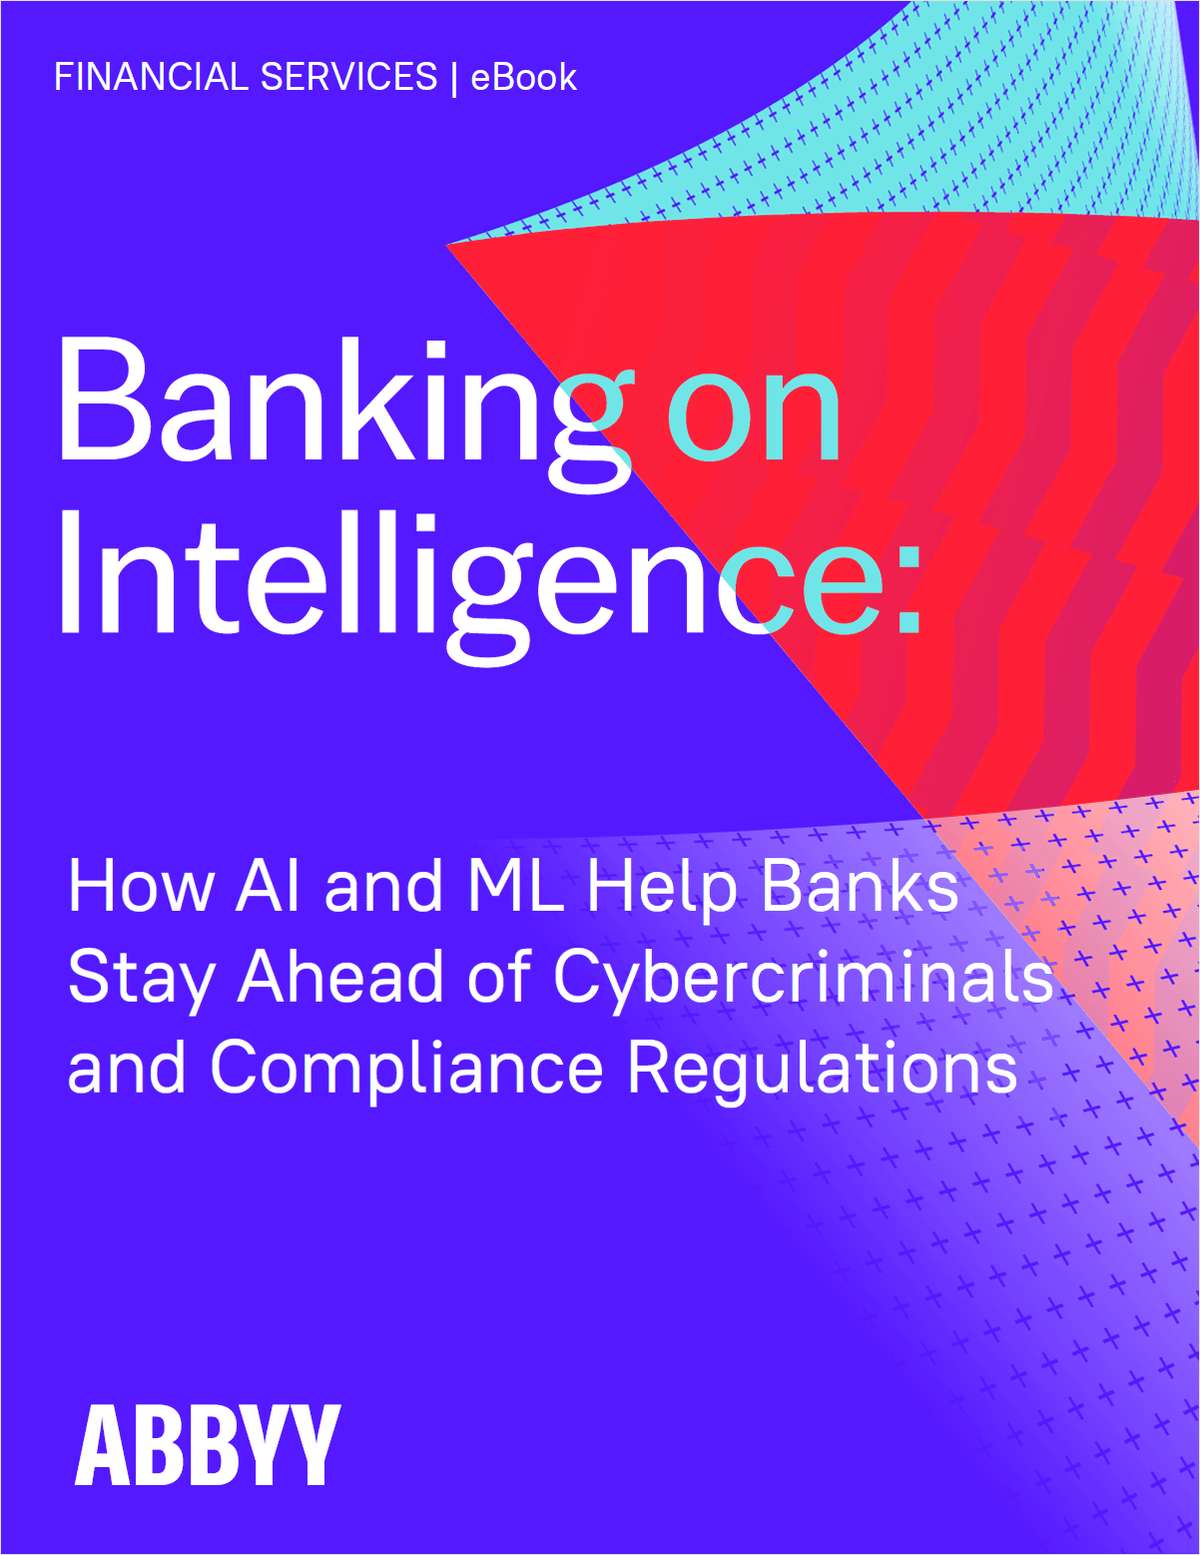 Banking on Intelligence | How AI and ML Help Banks Stay Ahead of Cybercriminals and Compliance Regulations